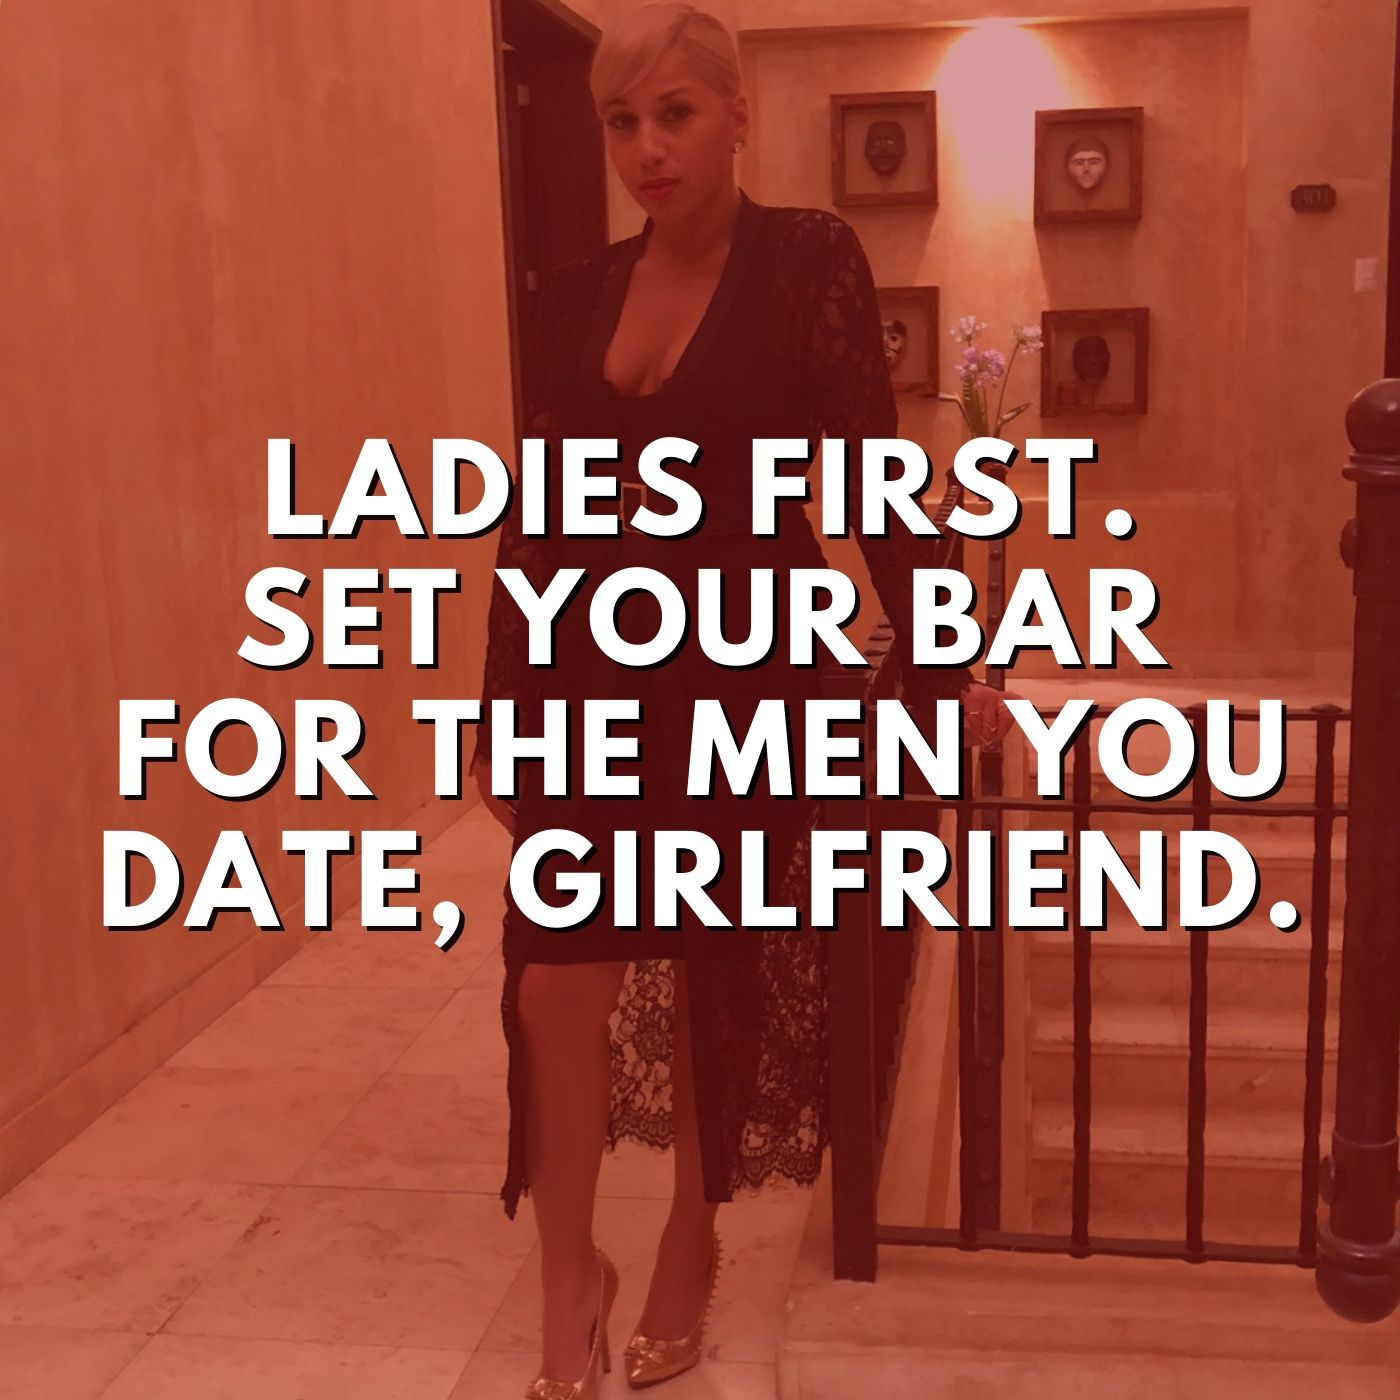 Ladies First. Set your bar for the men date, girlfriend.